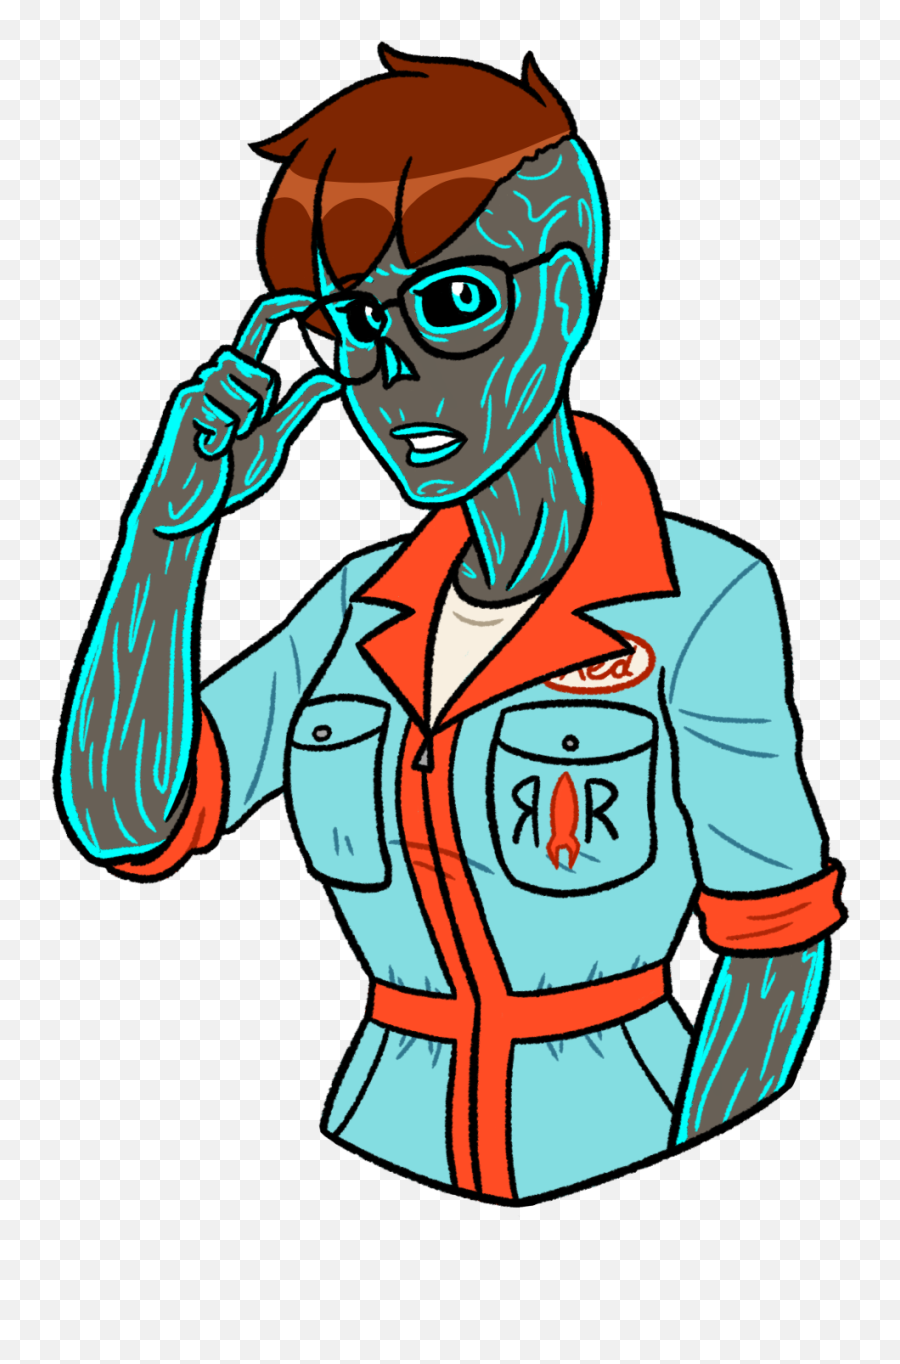 Still Has A Large Portion Of Her Hair On The Top But - Fallout Blue Ghoul Emoji,Pulling Hair Out Emoji